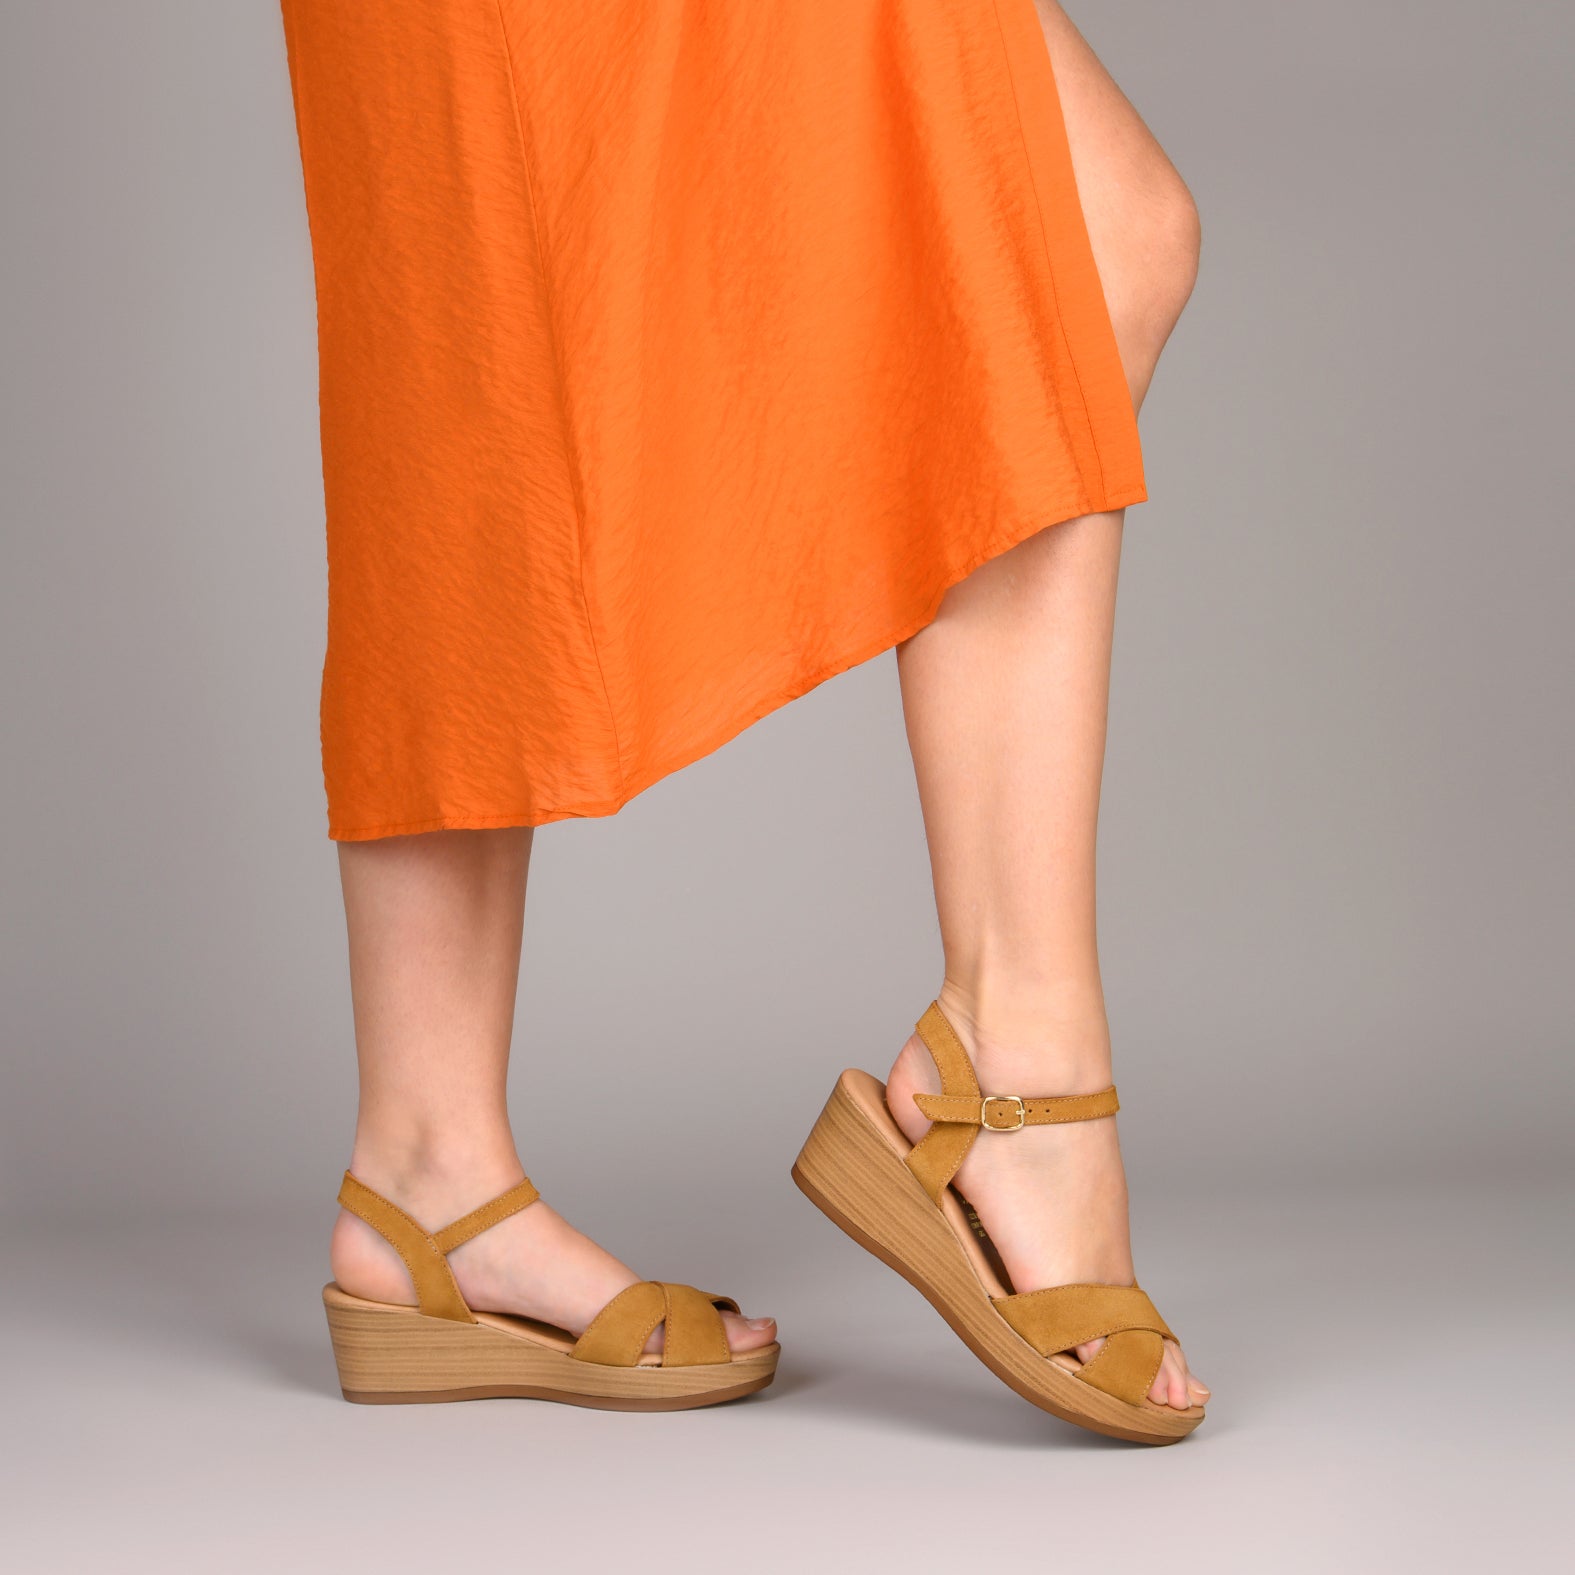 MAR – CAMEL WEDGE SHOES